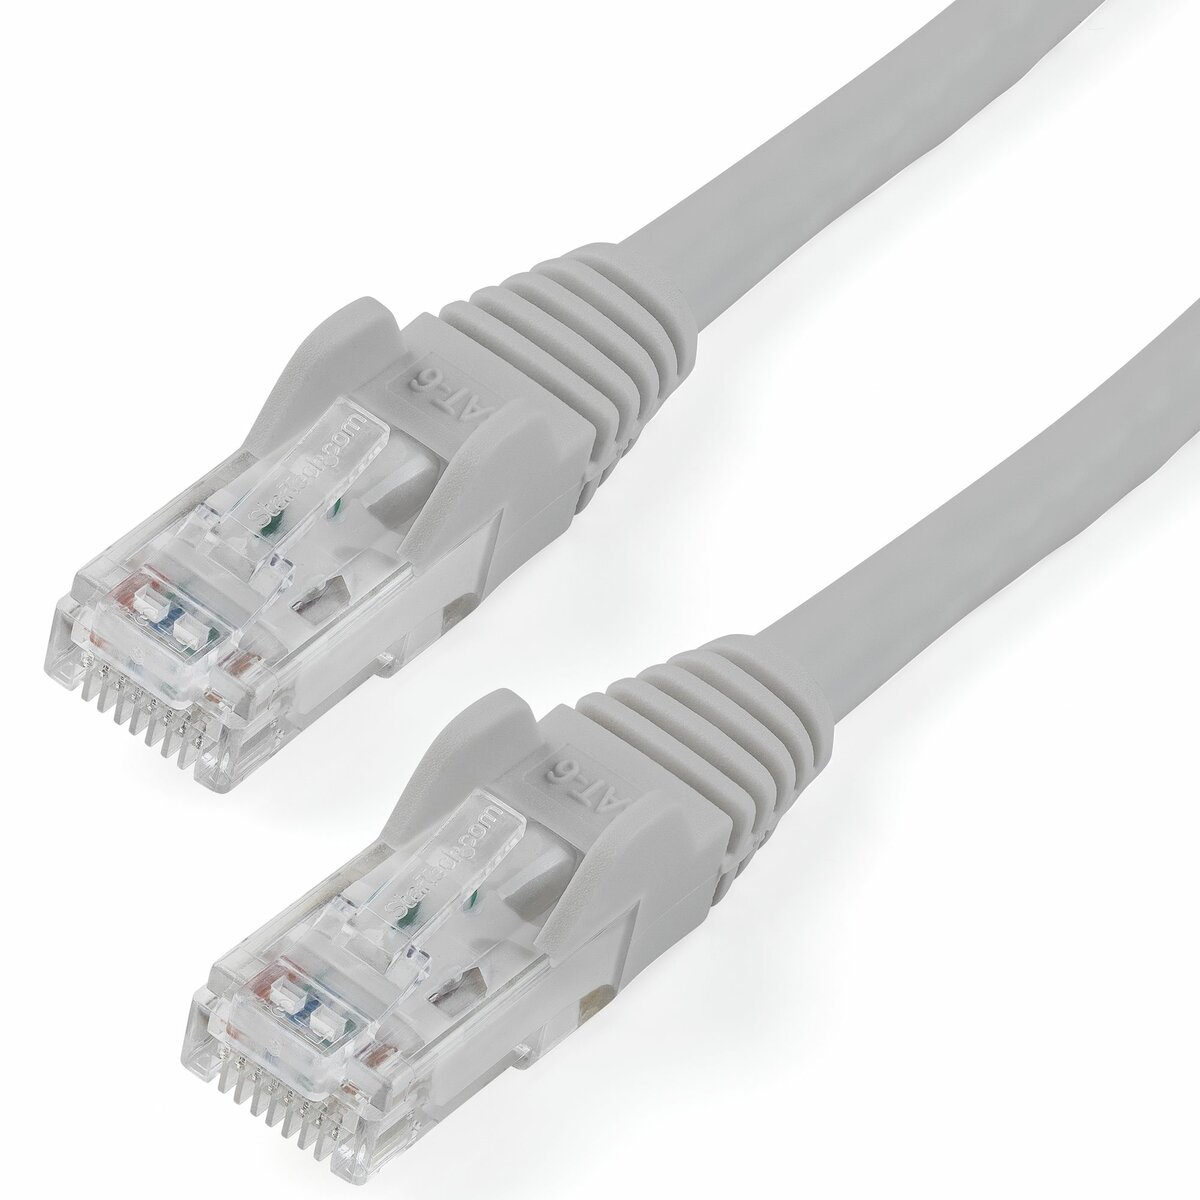 StarTech.com Cable raceway 6 ft white for PN N6PATCH100BK